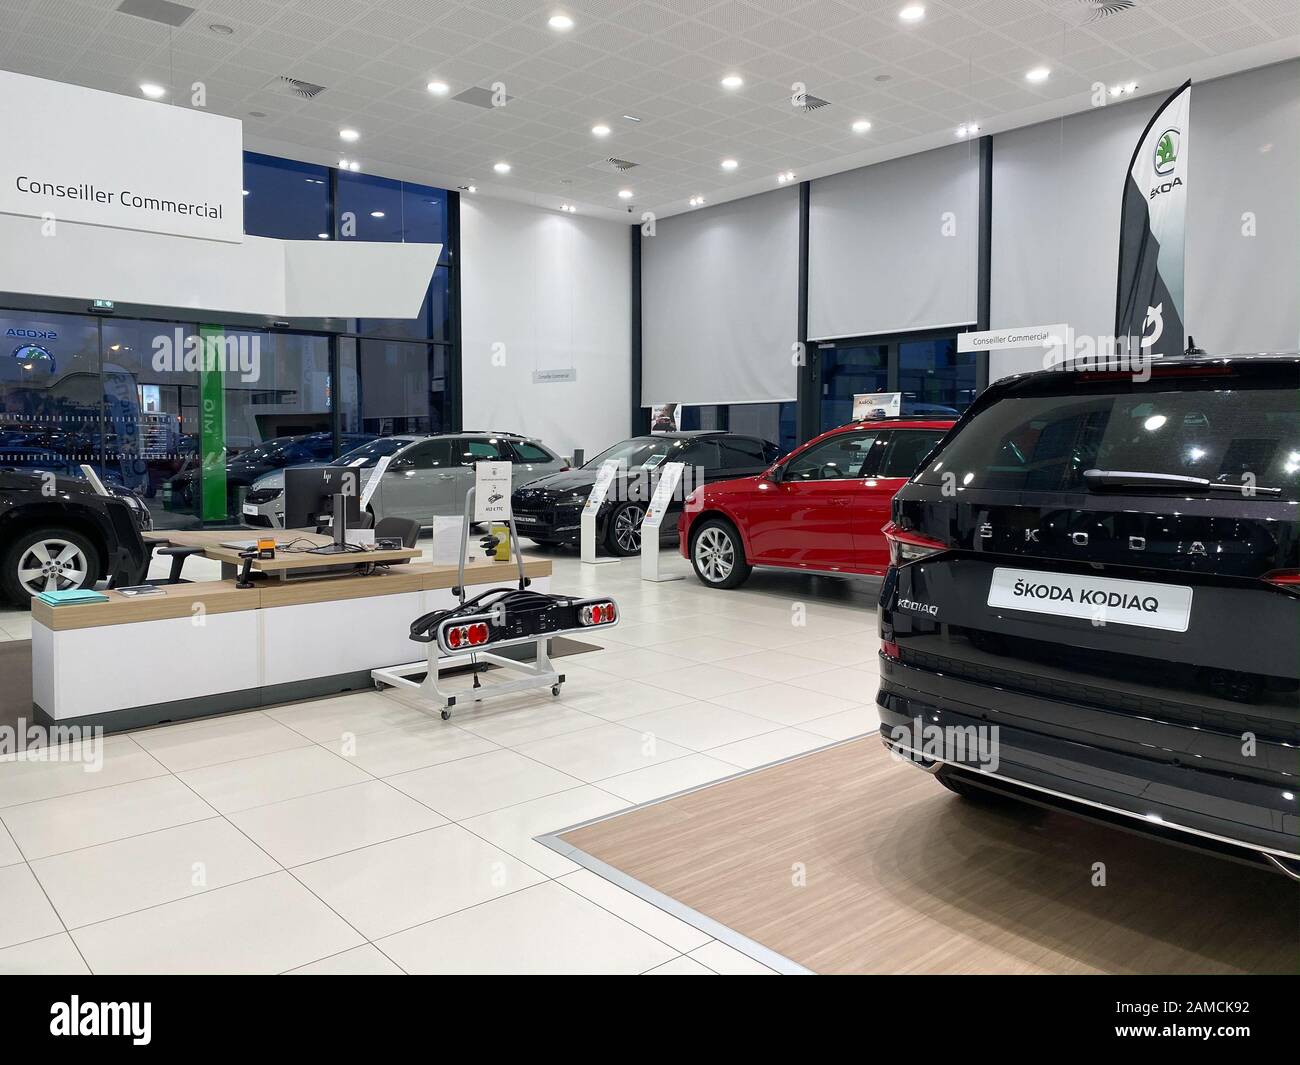 Paris, France - Oct 25, 2019: Wide angle view of car dealership showroom interior with multiple Skoda Cars inside Stock Photo